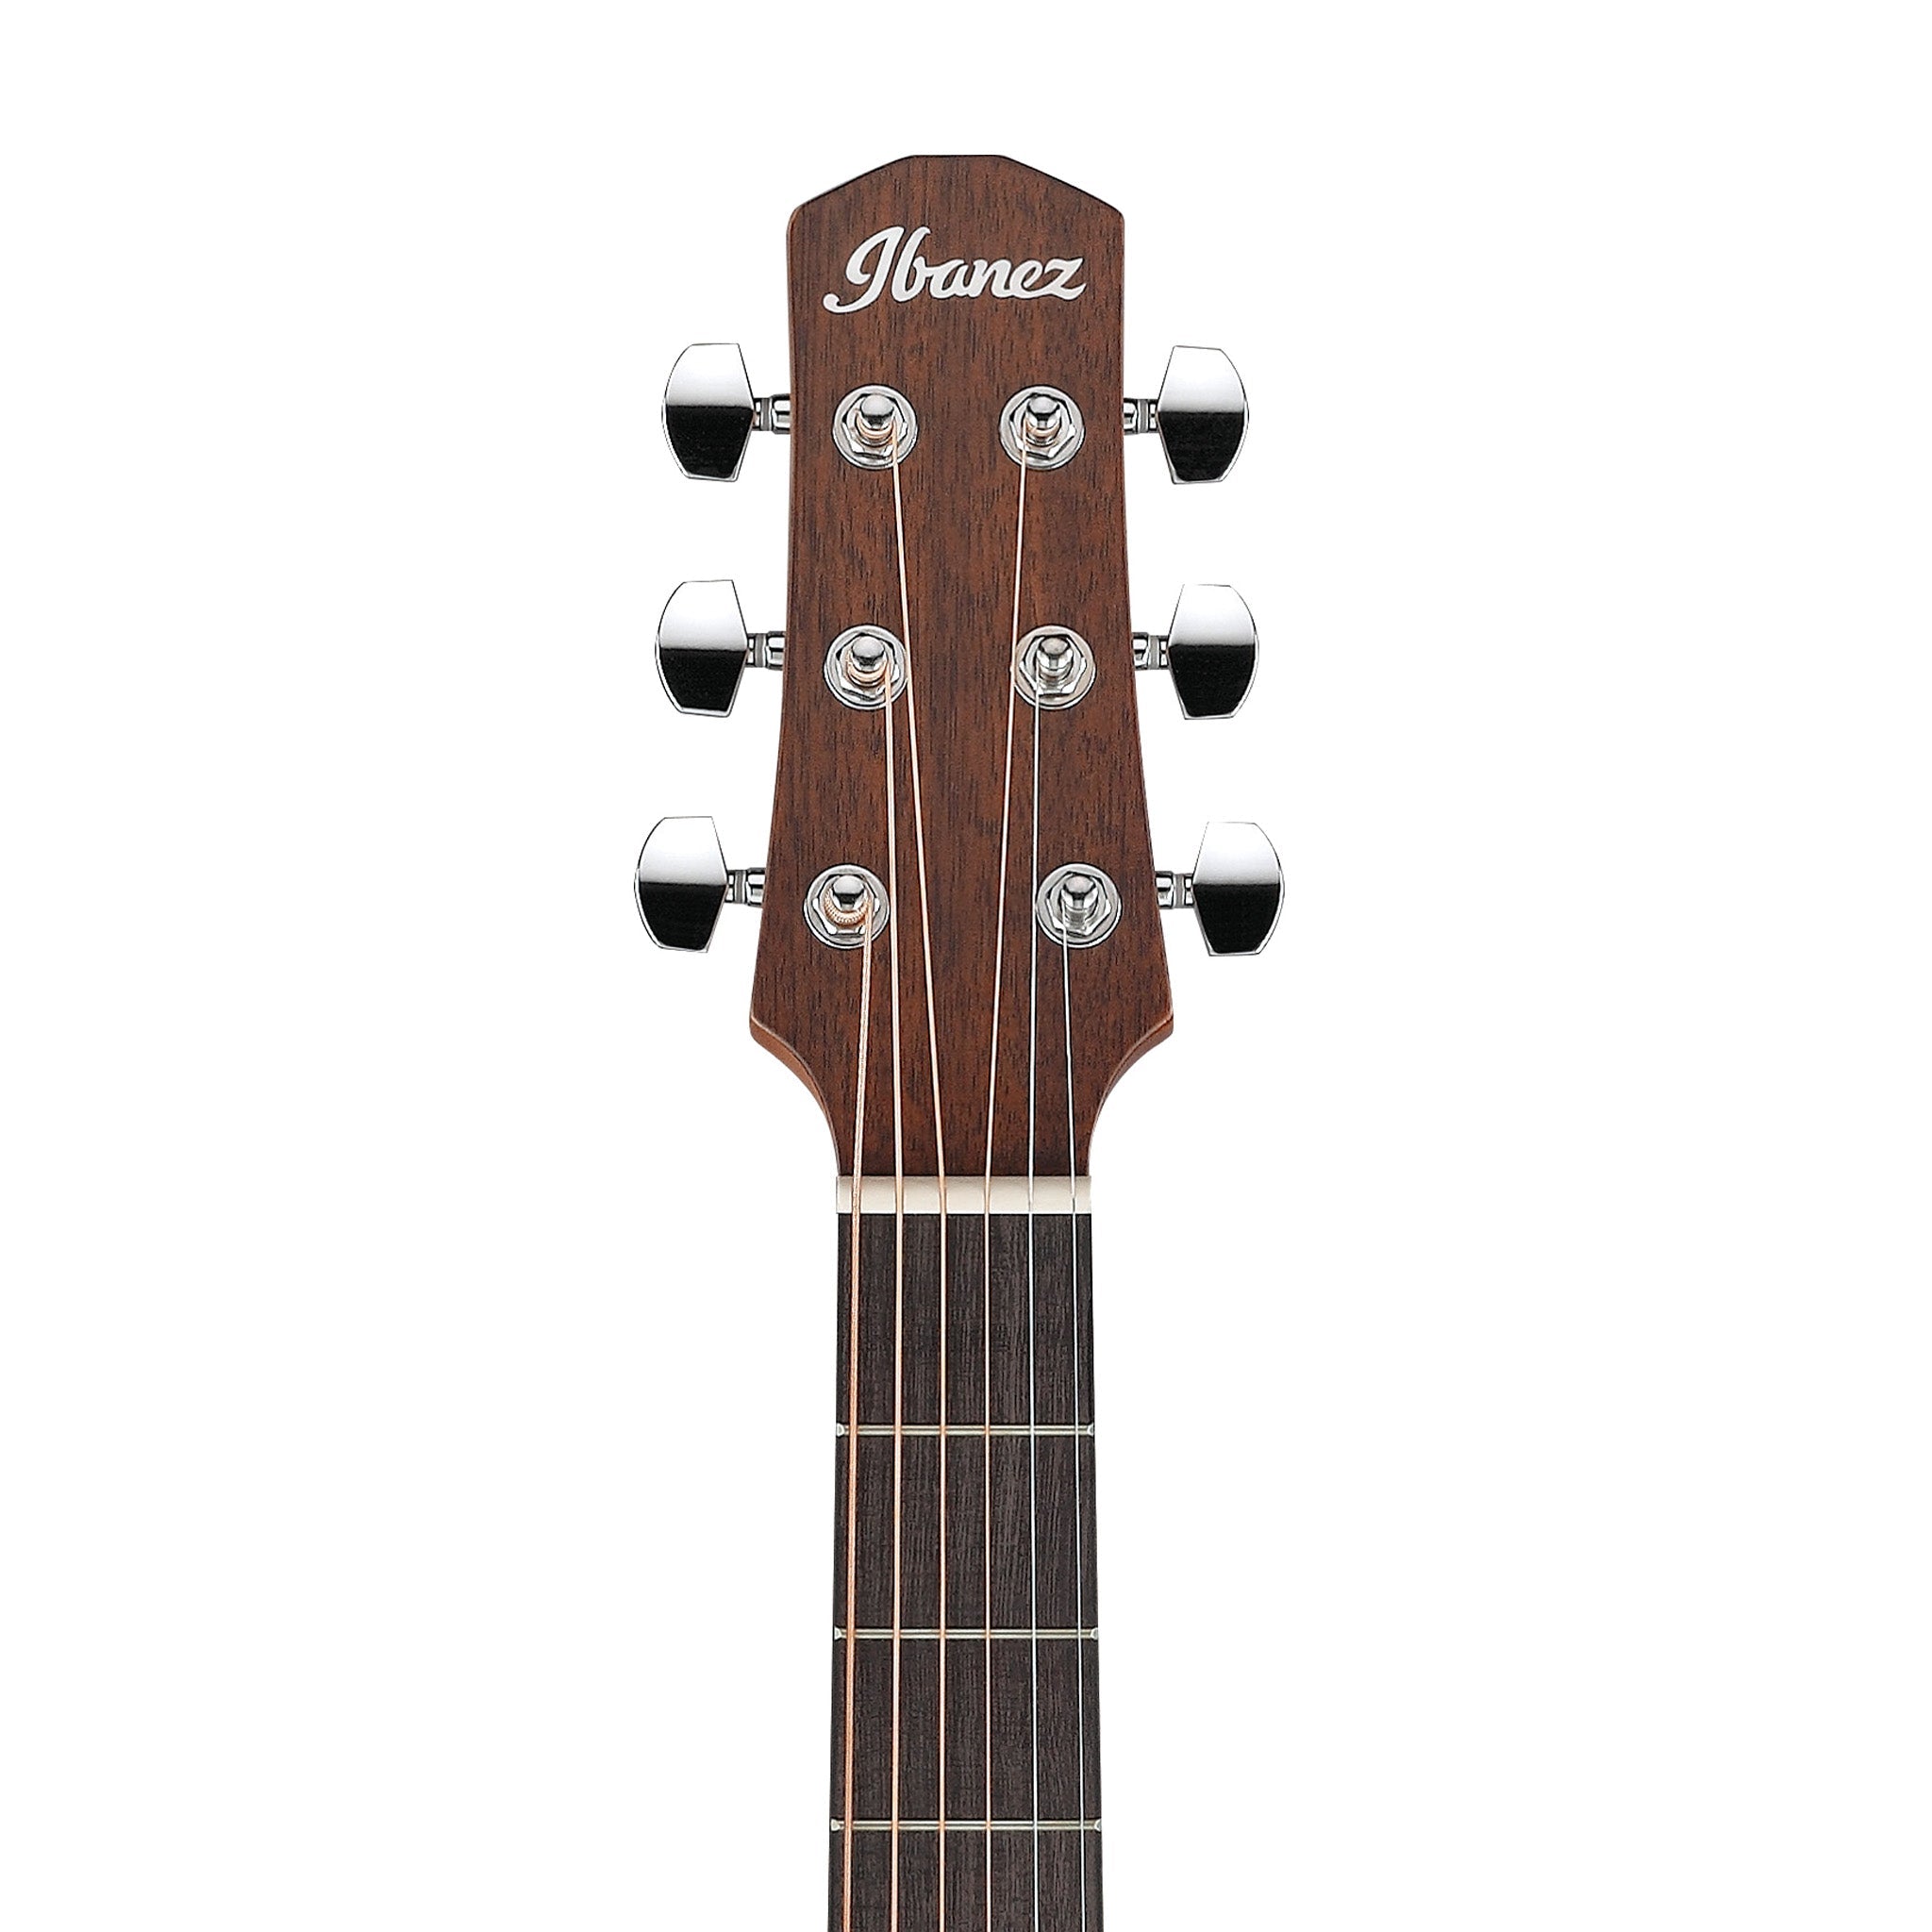 Ibanez AAM50CE-OPN Acoustic-Electric Guitar, Open Pore Natural